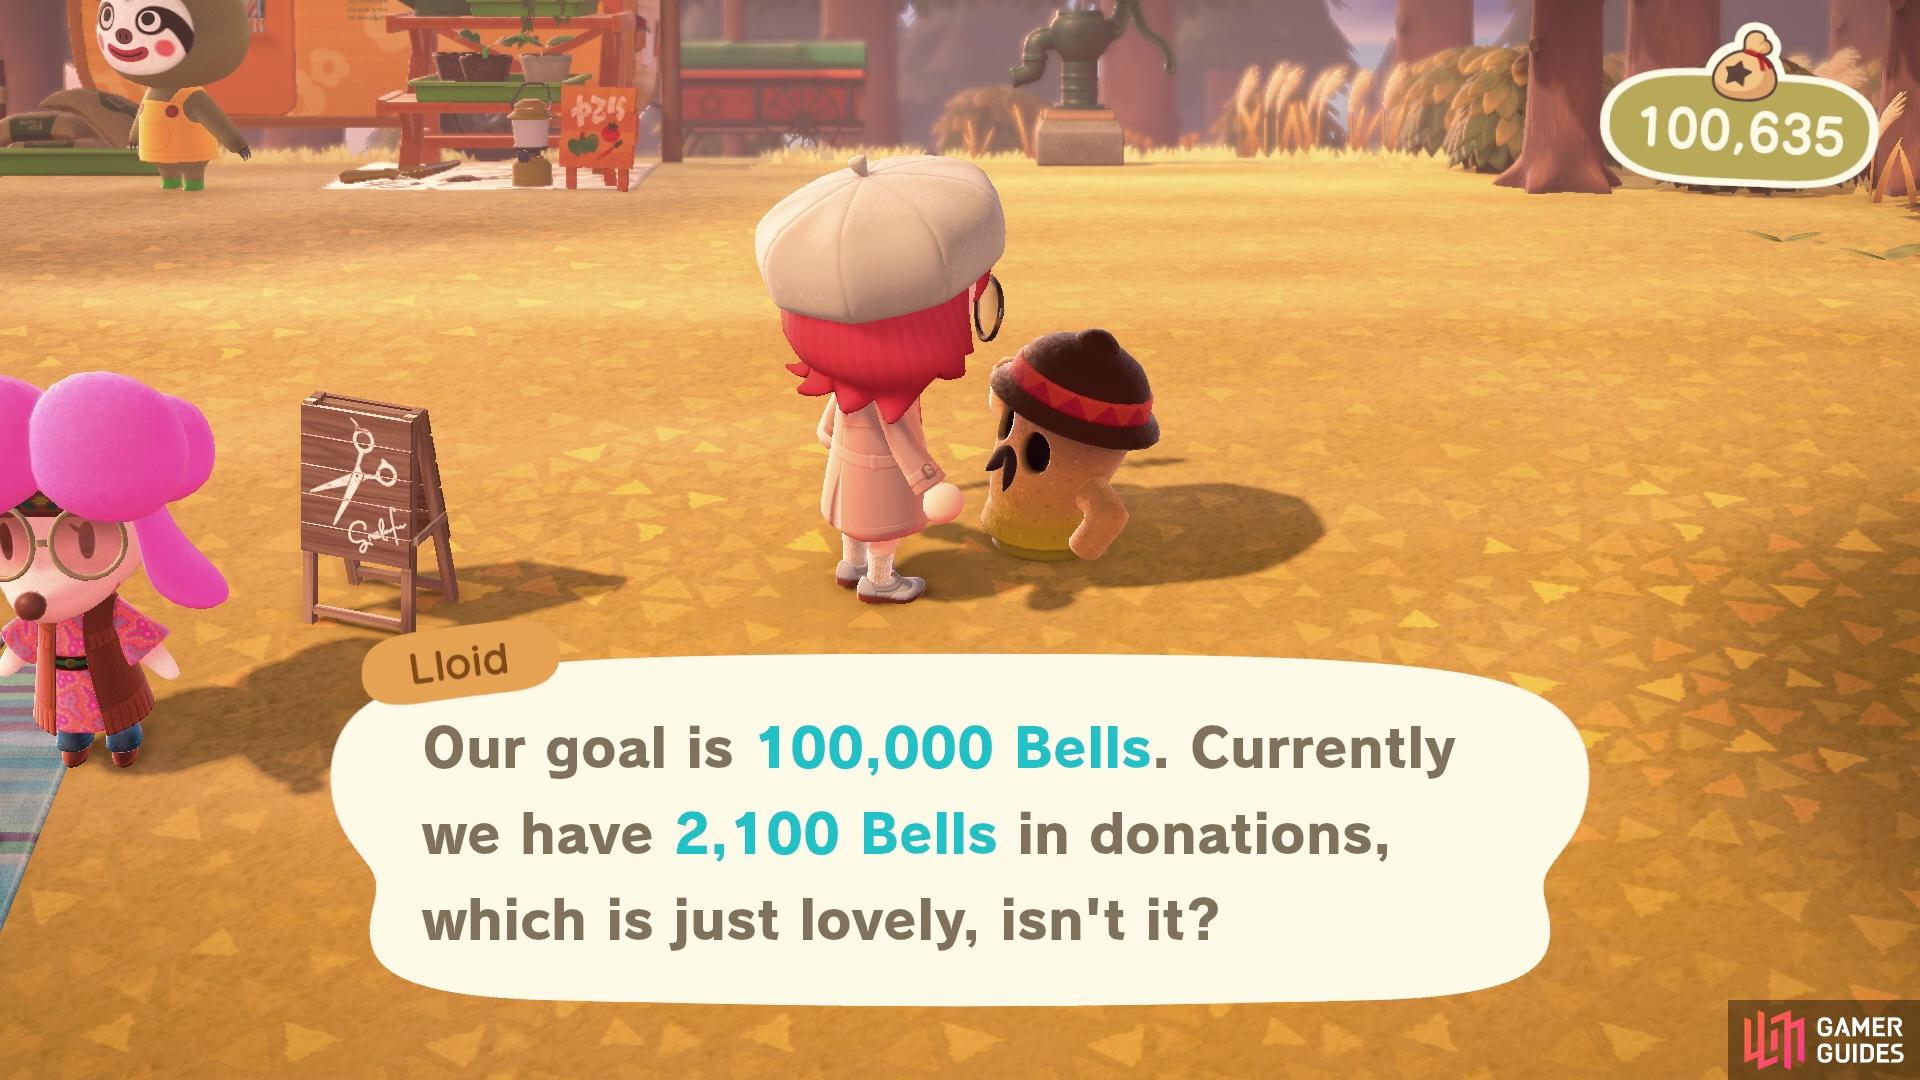 Pay Lloid the 100,000 Bells to build Redd's shop. 